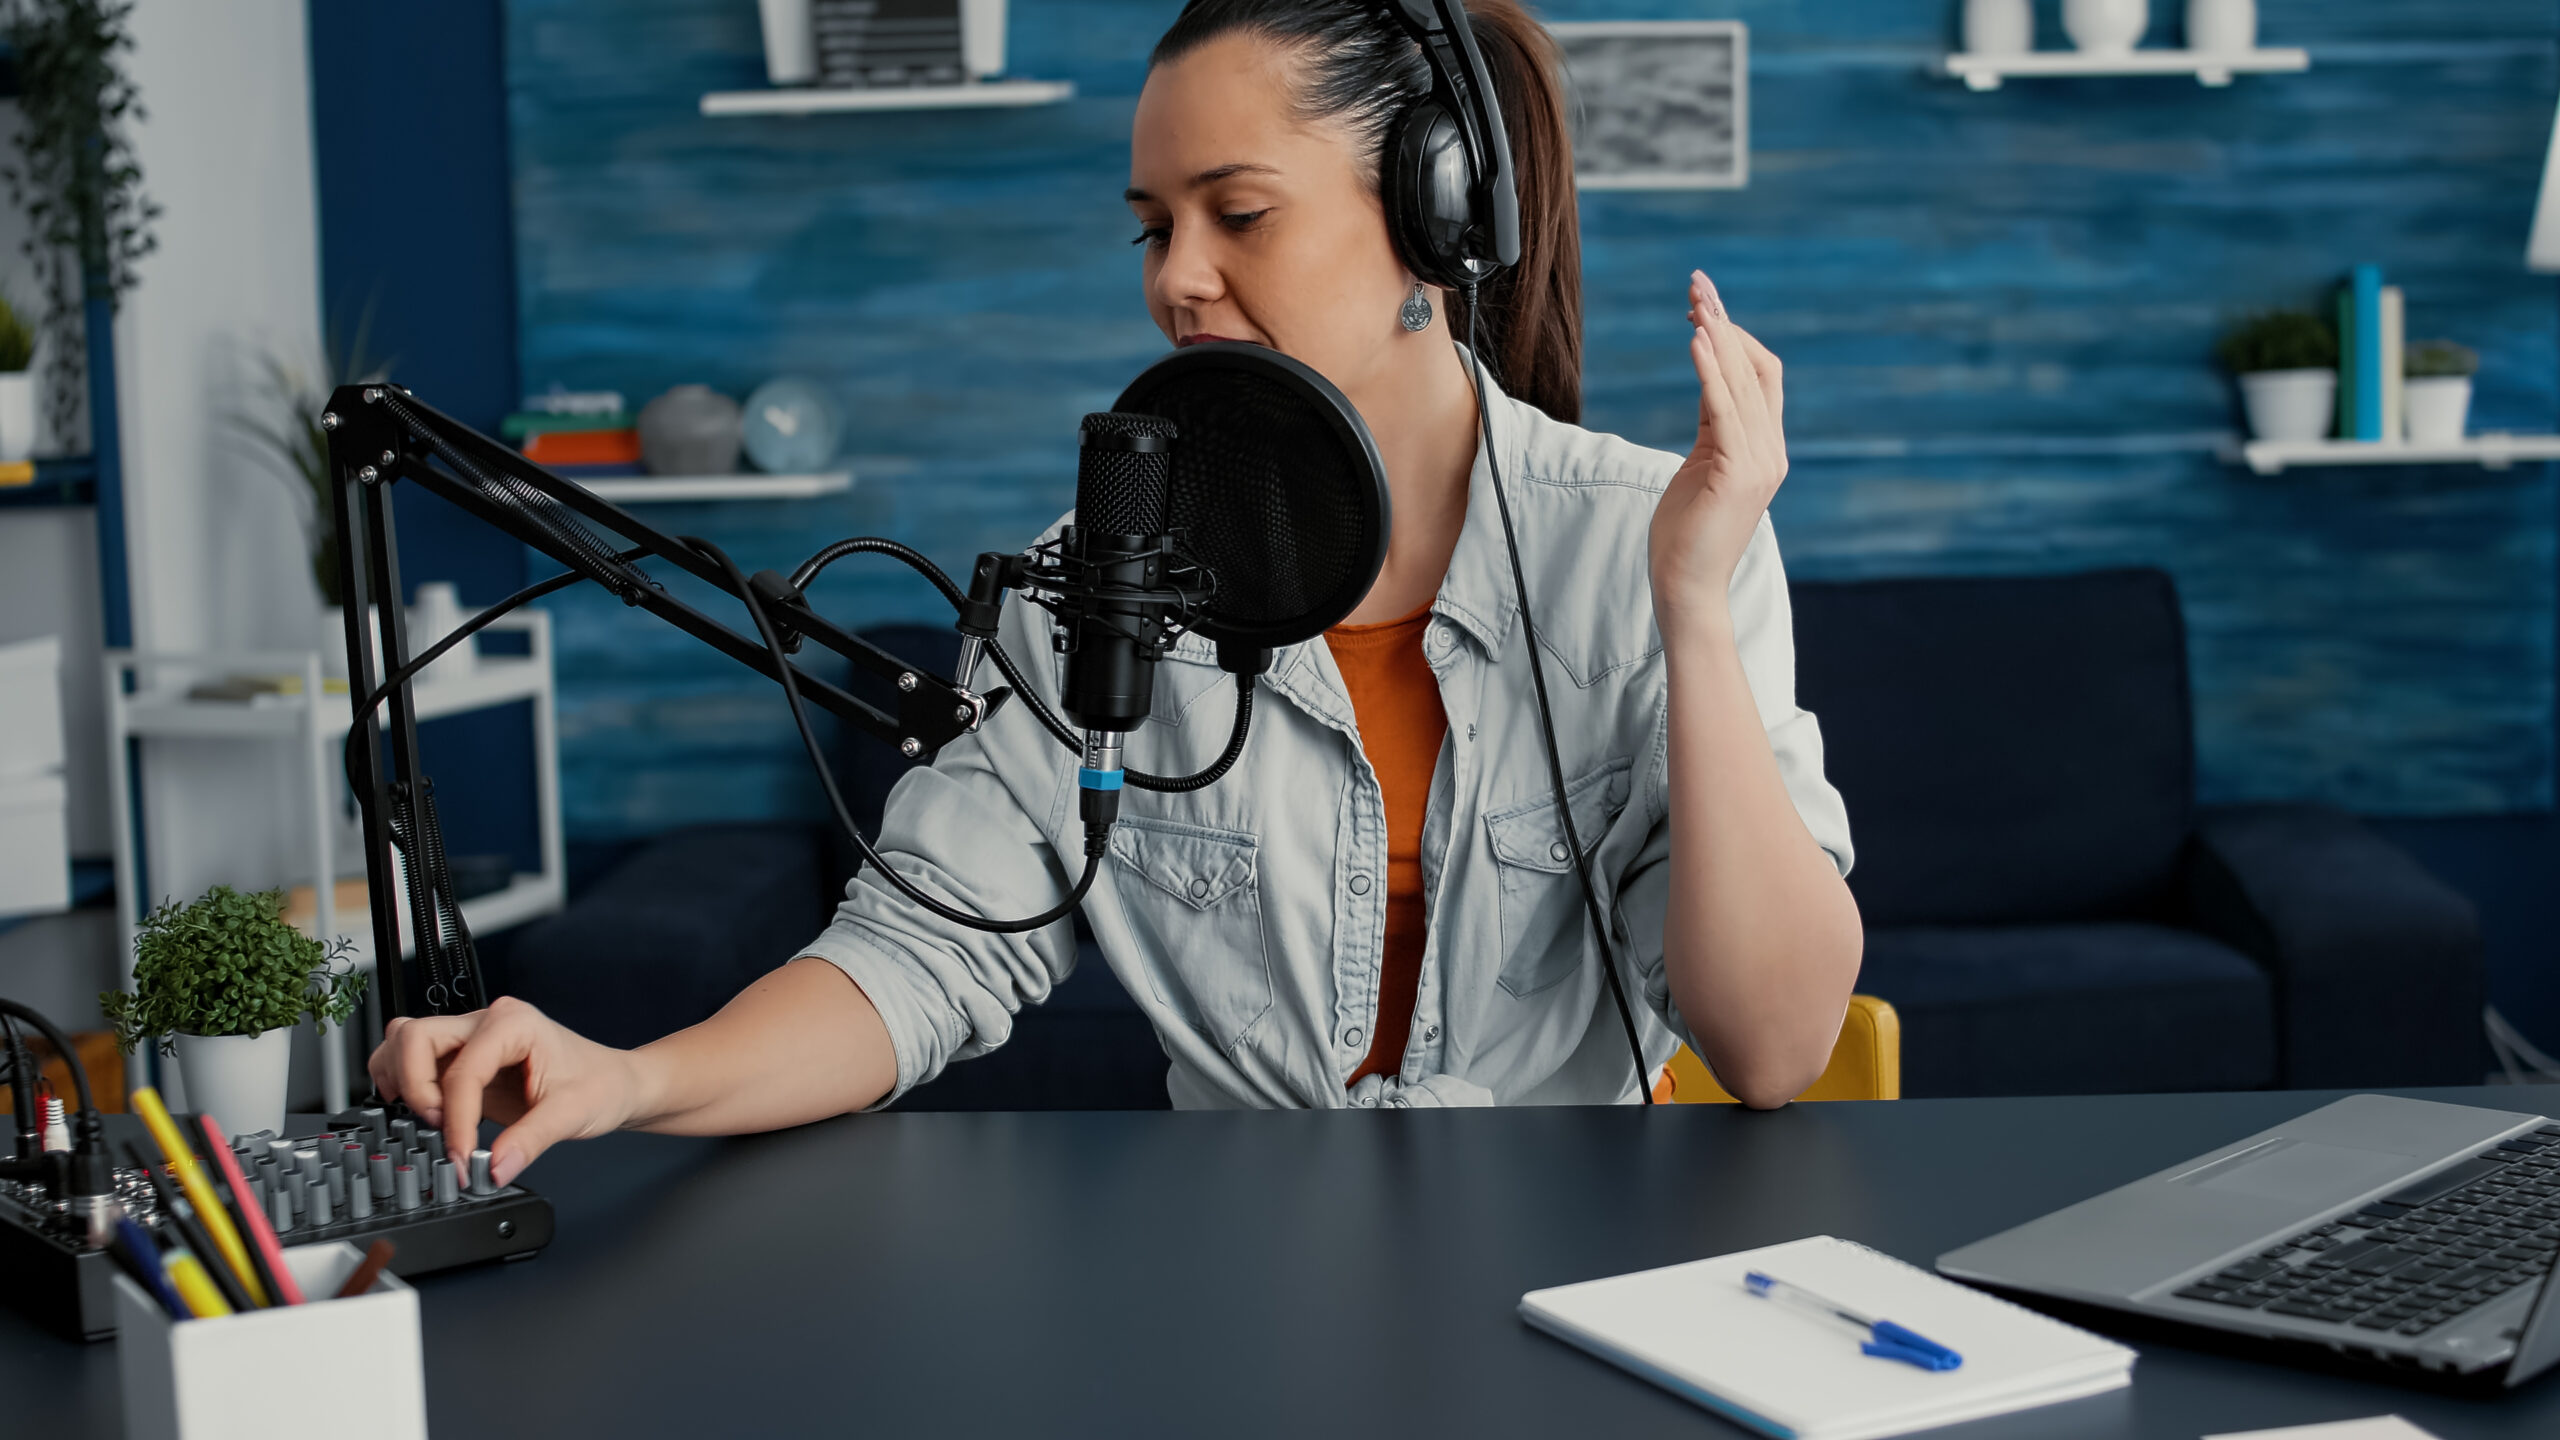 The Balanced Podcast Sheet: Exceptional Podcast Recommendations for Accountants | Image by Freepik